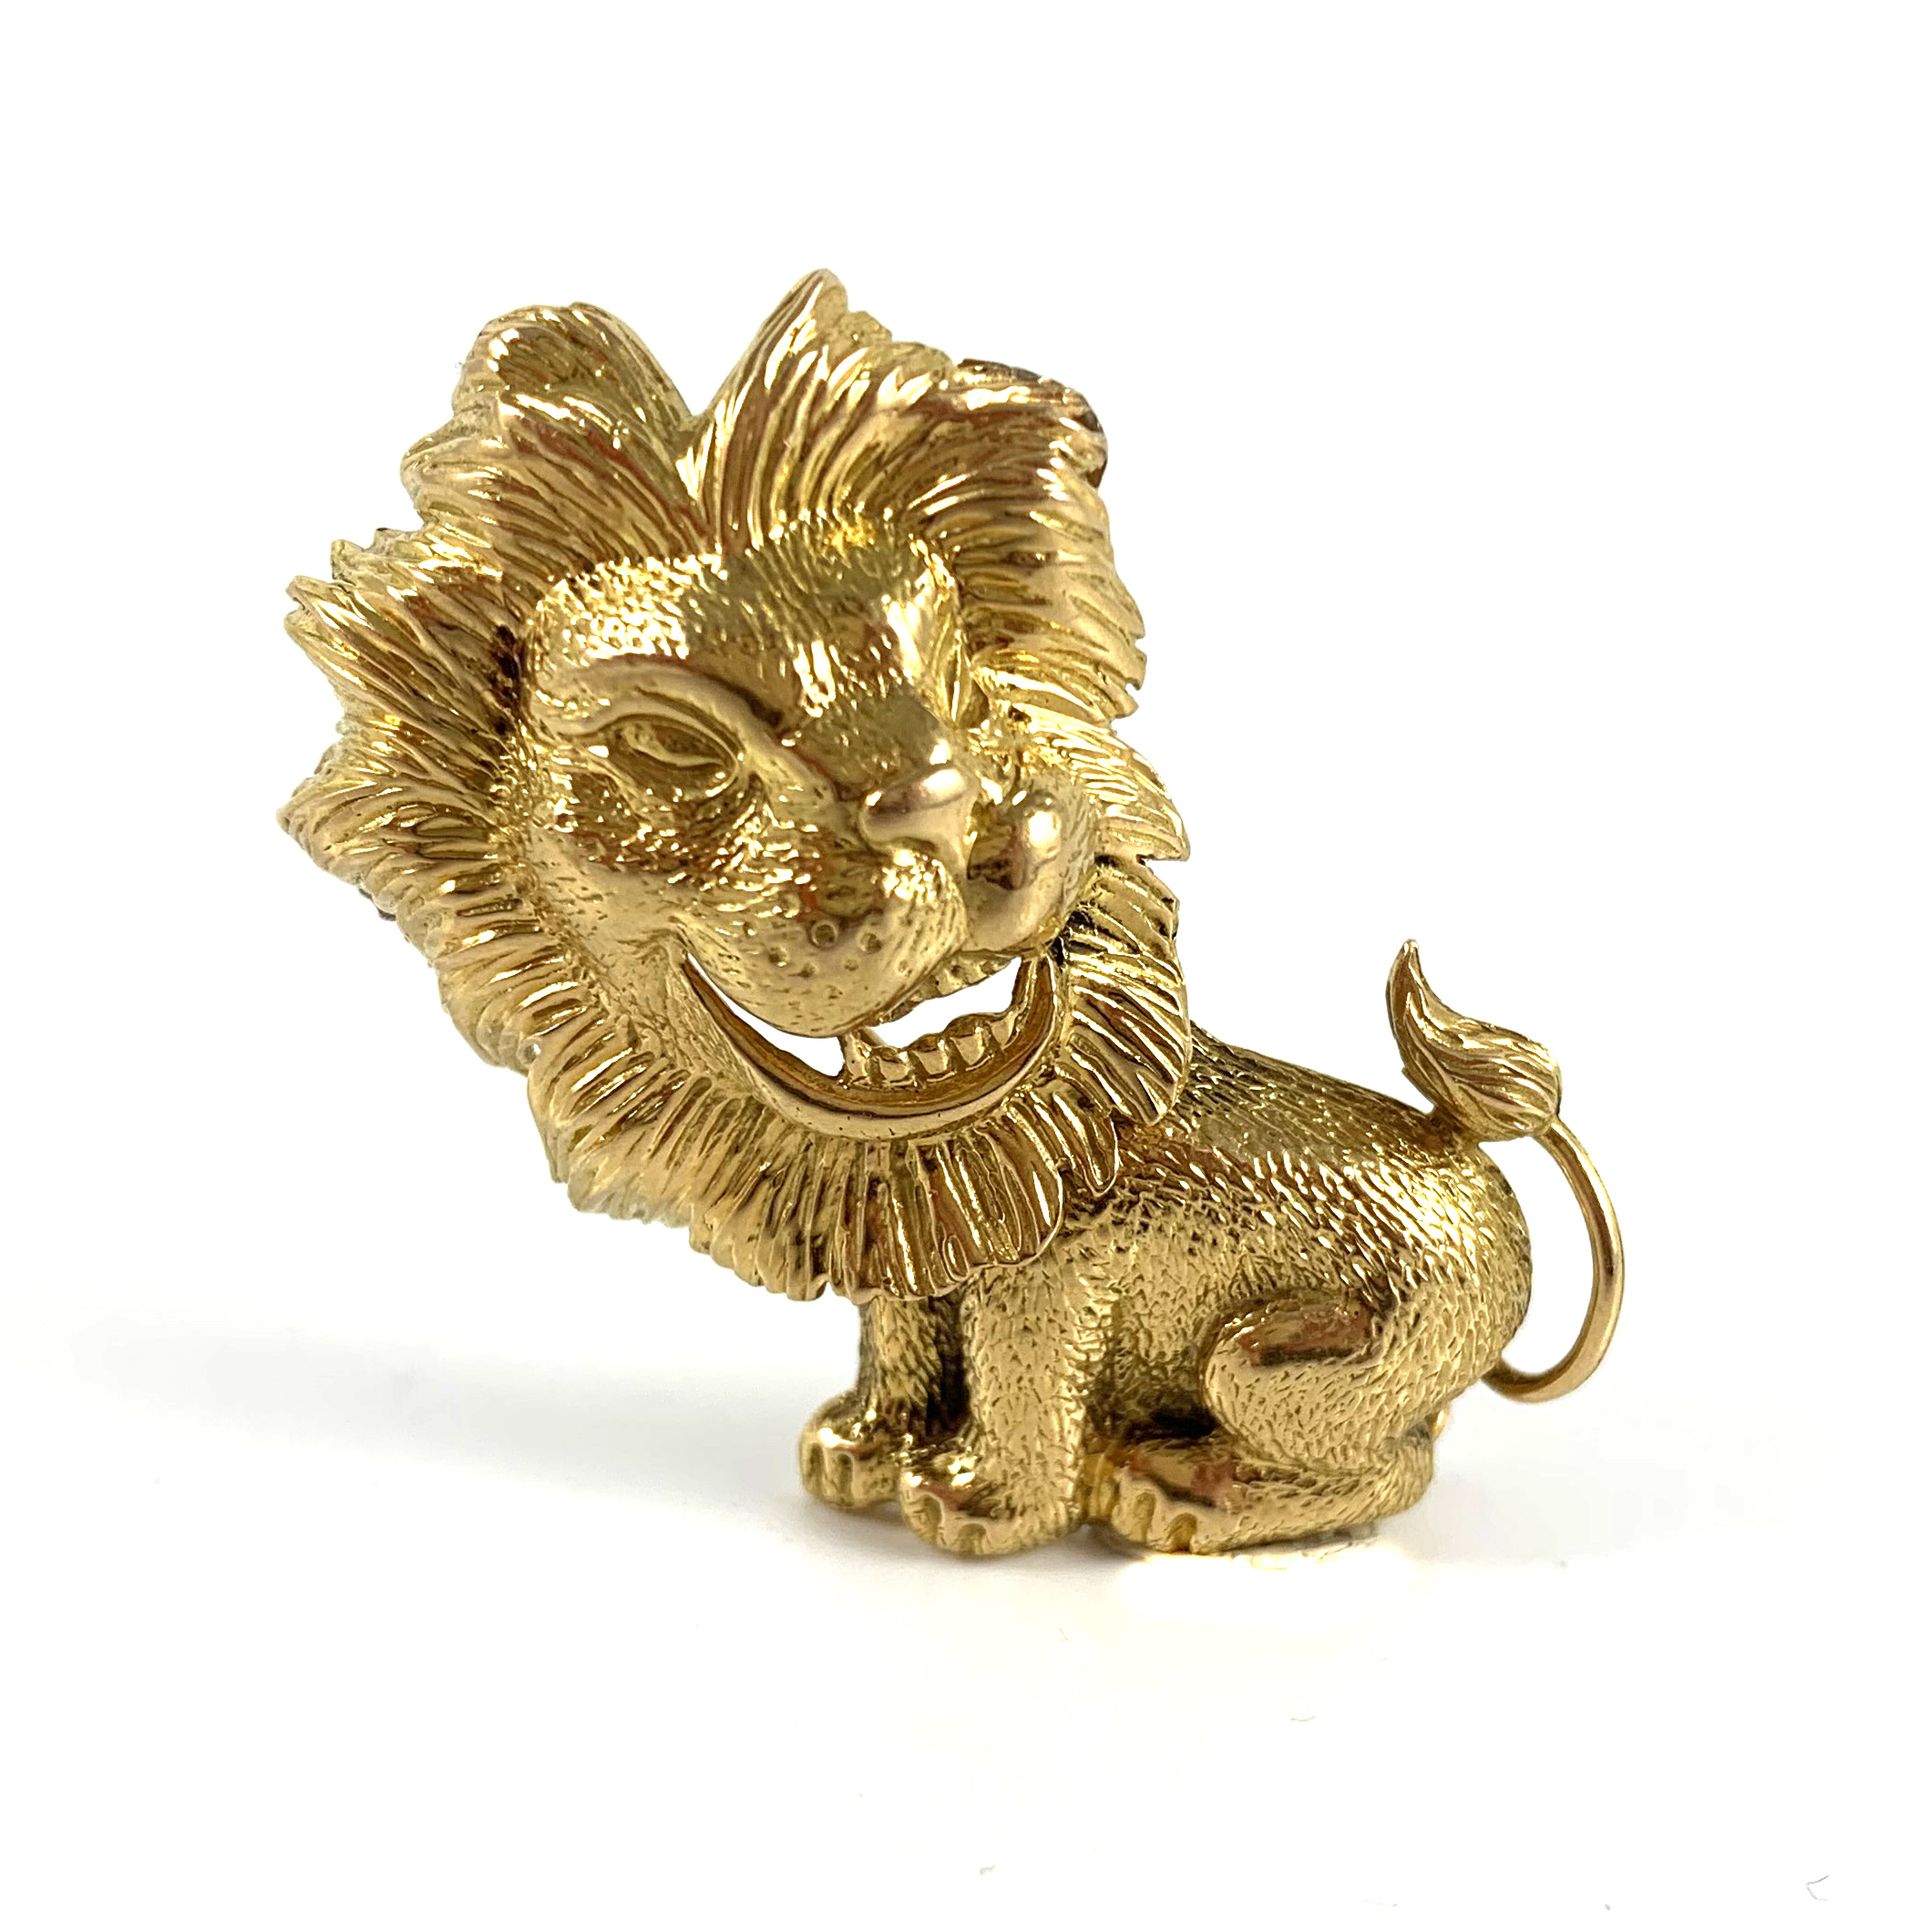 Null PODDLE with a chased lion. Set in 18K yellow gold. Dimensions : 4 x 4.7 cm.&hellip;